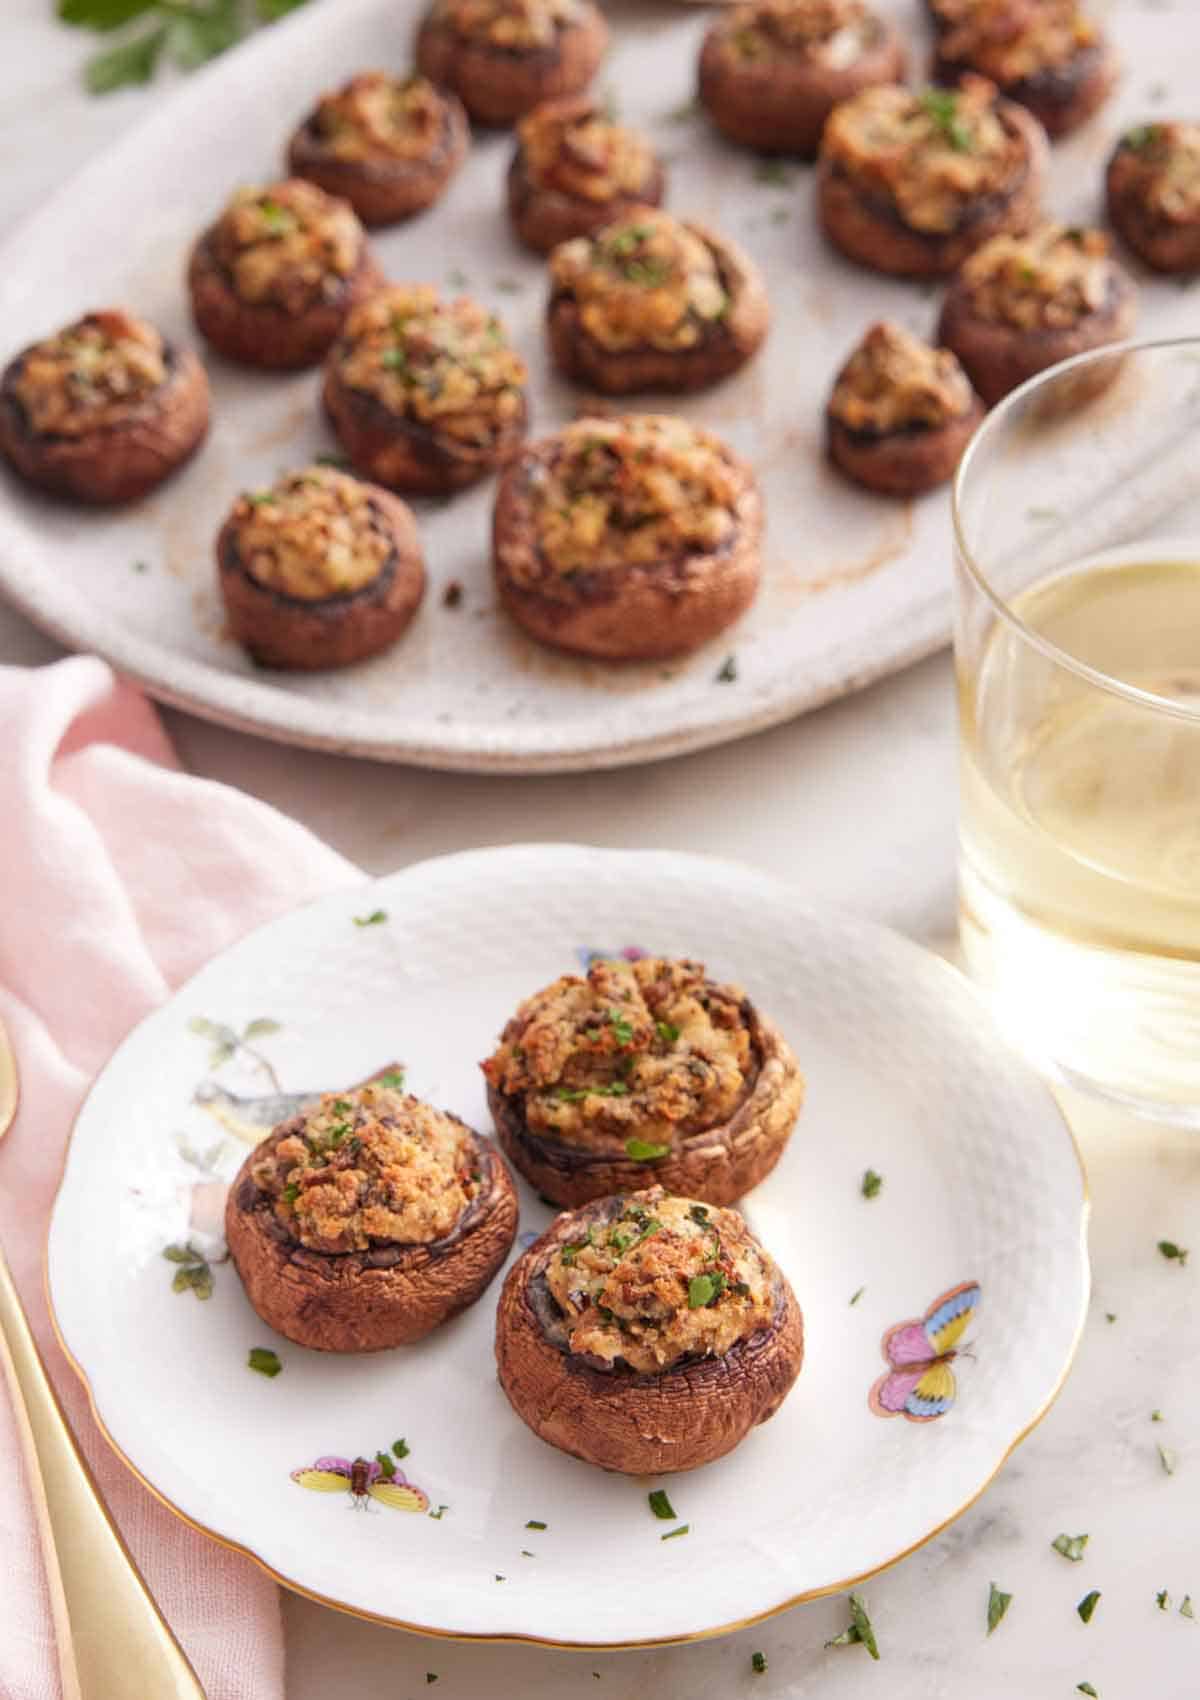 A plate with three stuffed mushrooms by a glass of wine and a platter with more mushrooms.